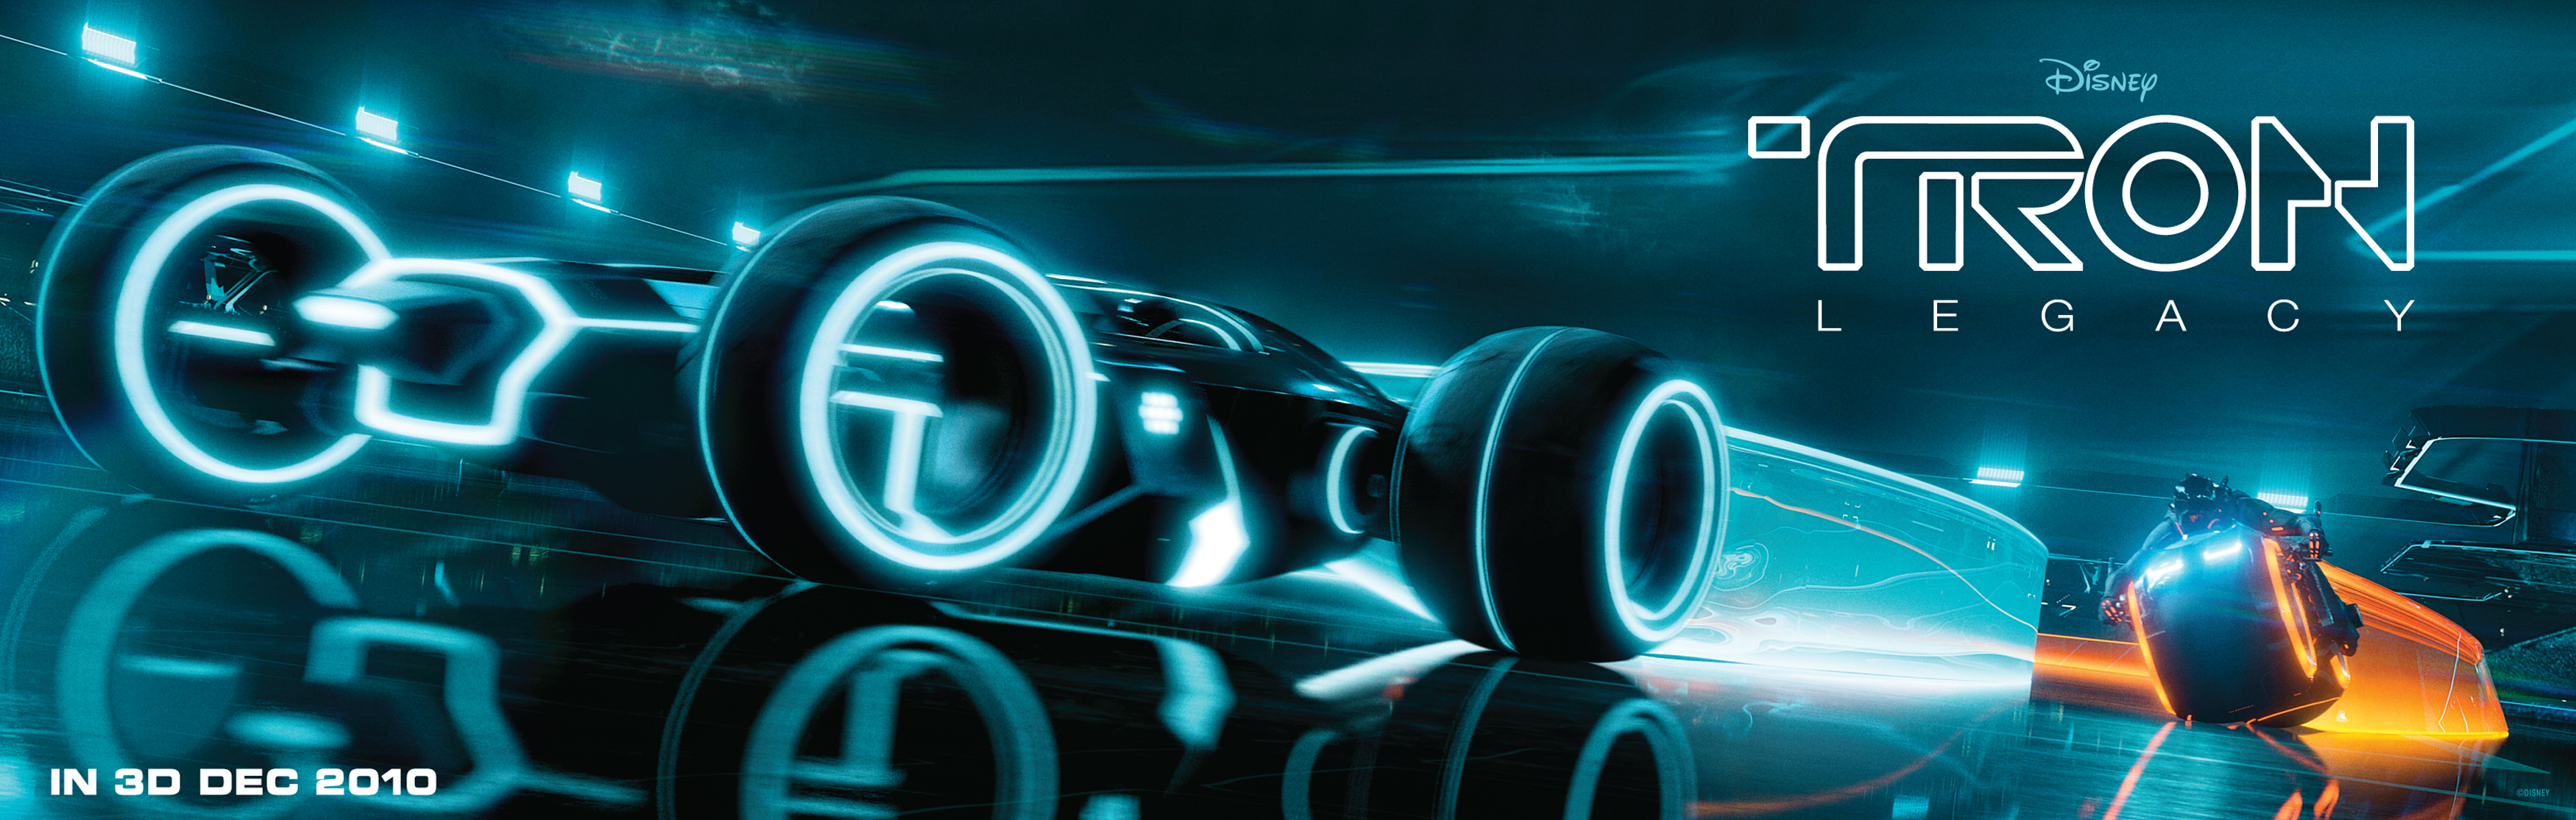 X Tron Legacy Dual Screen Wallpaper So This Is What I M